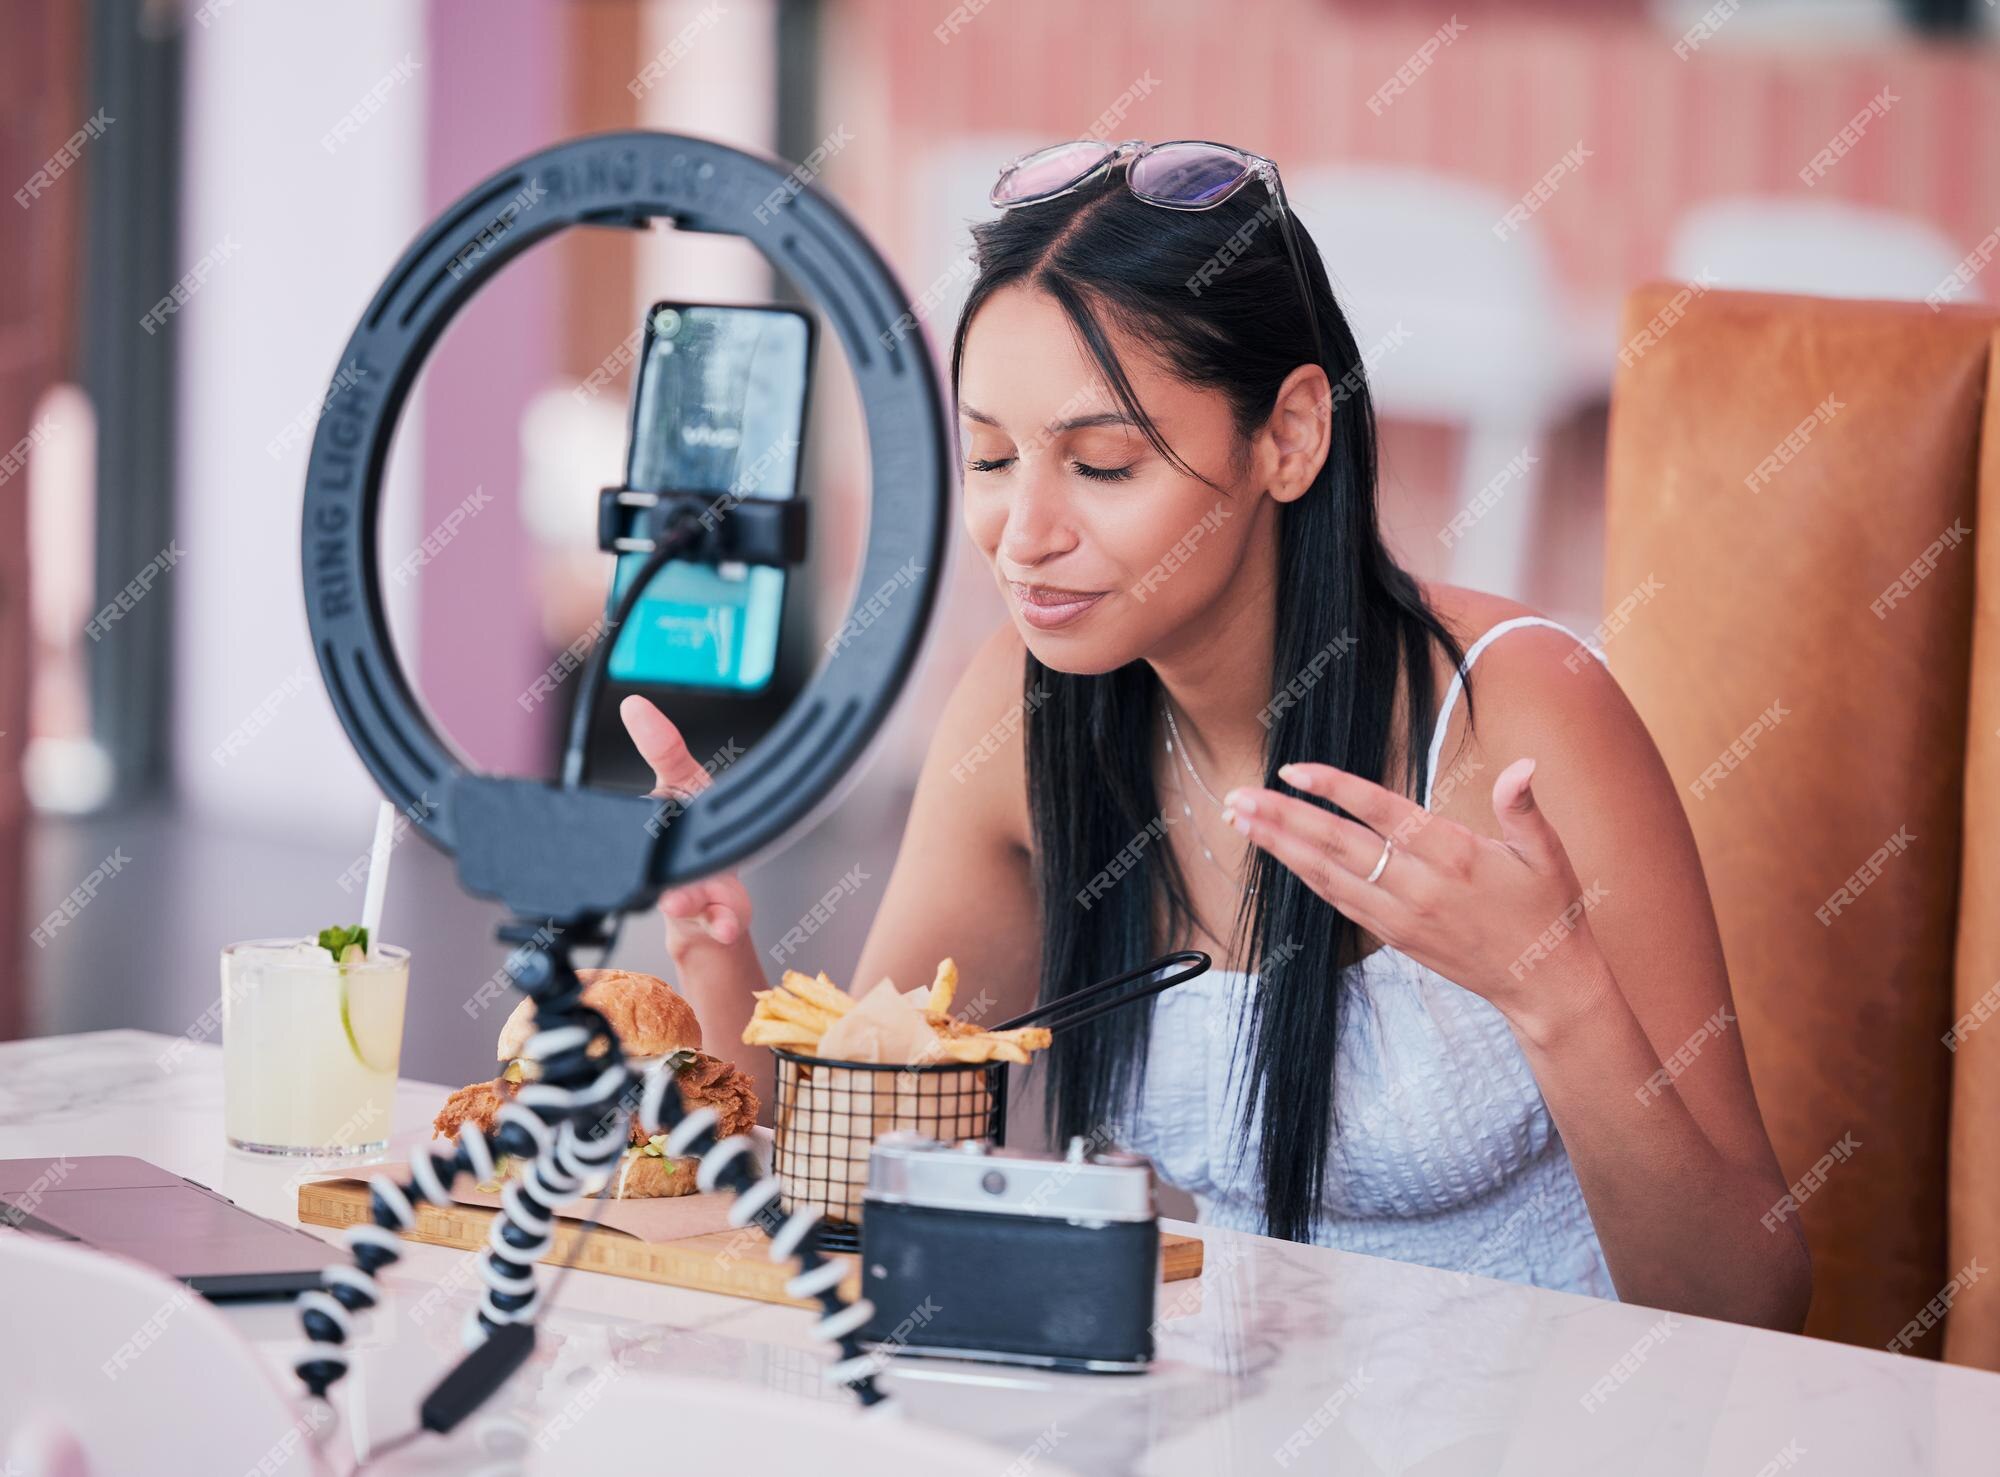 Premium Photo Social media influencer smartphone and ring light for new fast food restaurant test for internet web and followers creative online communication with digital mobile tech for startup video blog